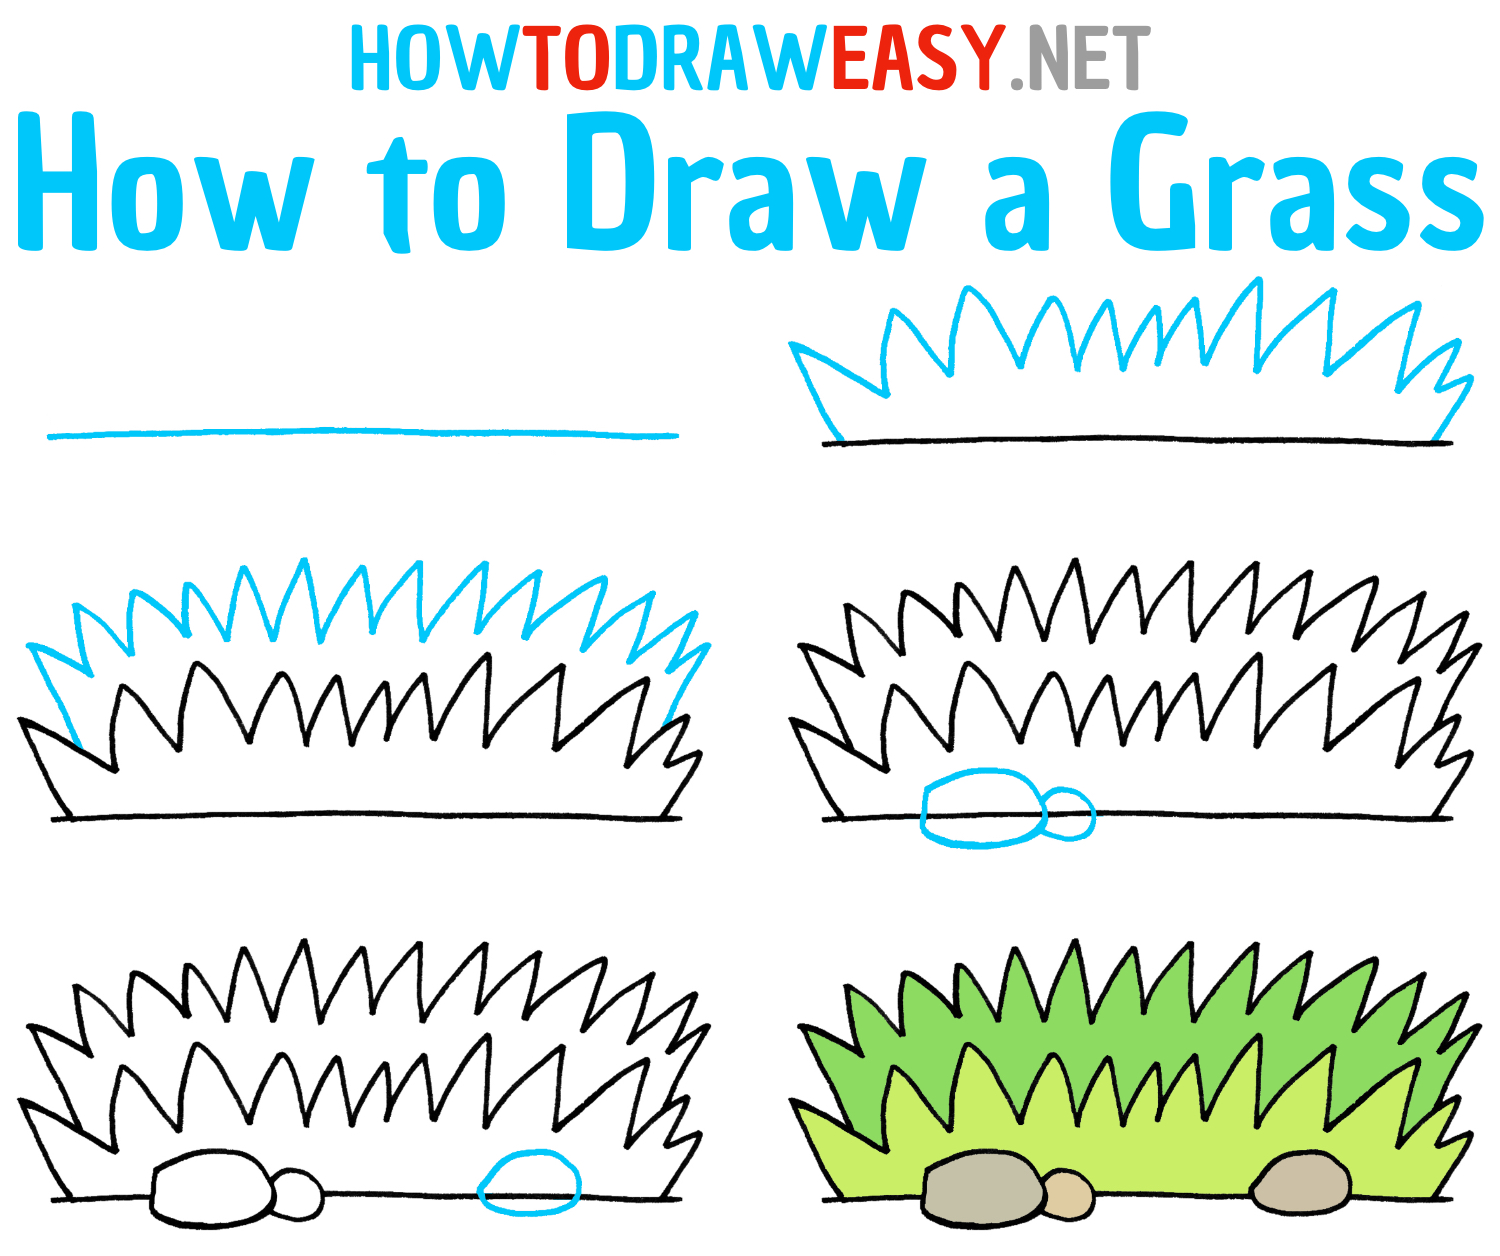 How to Draw a Grass Step by Step